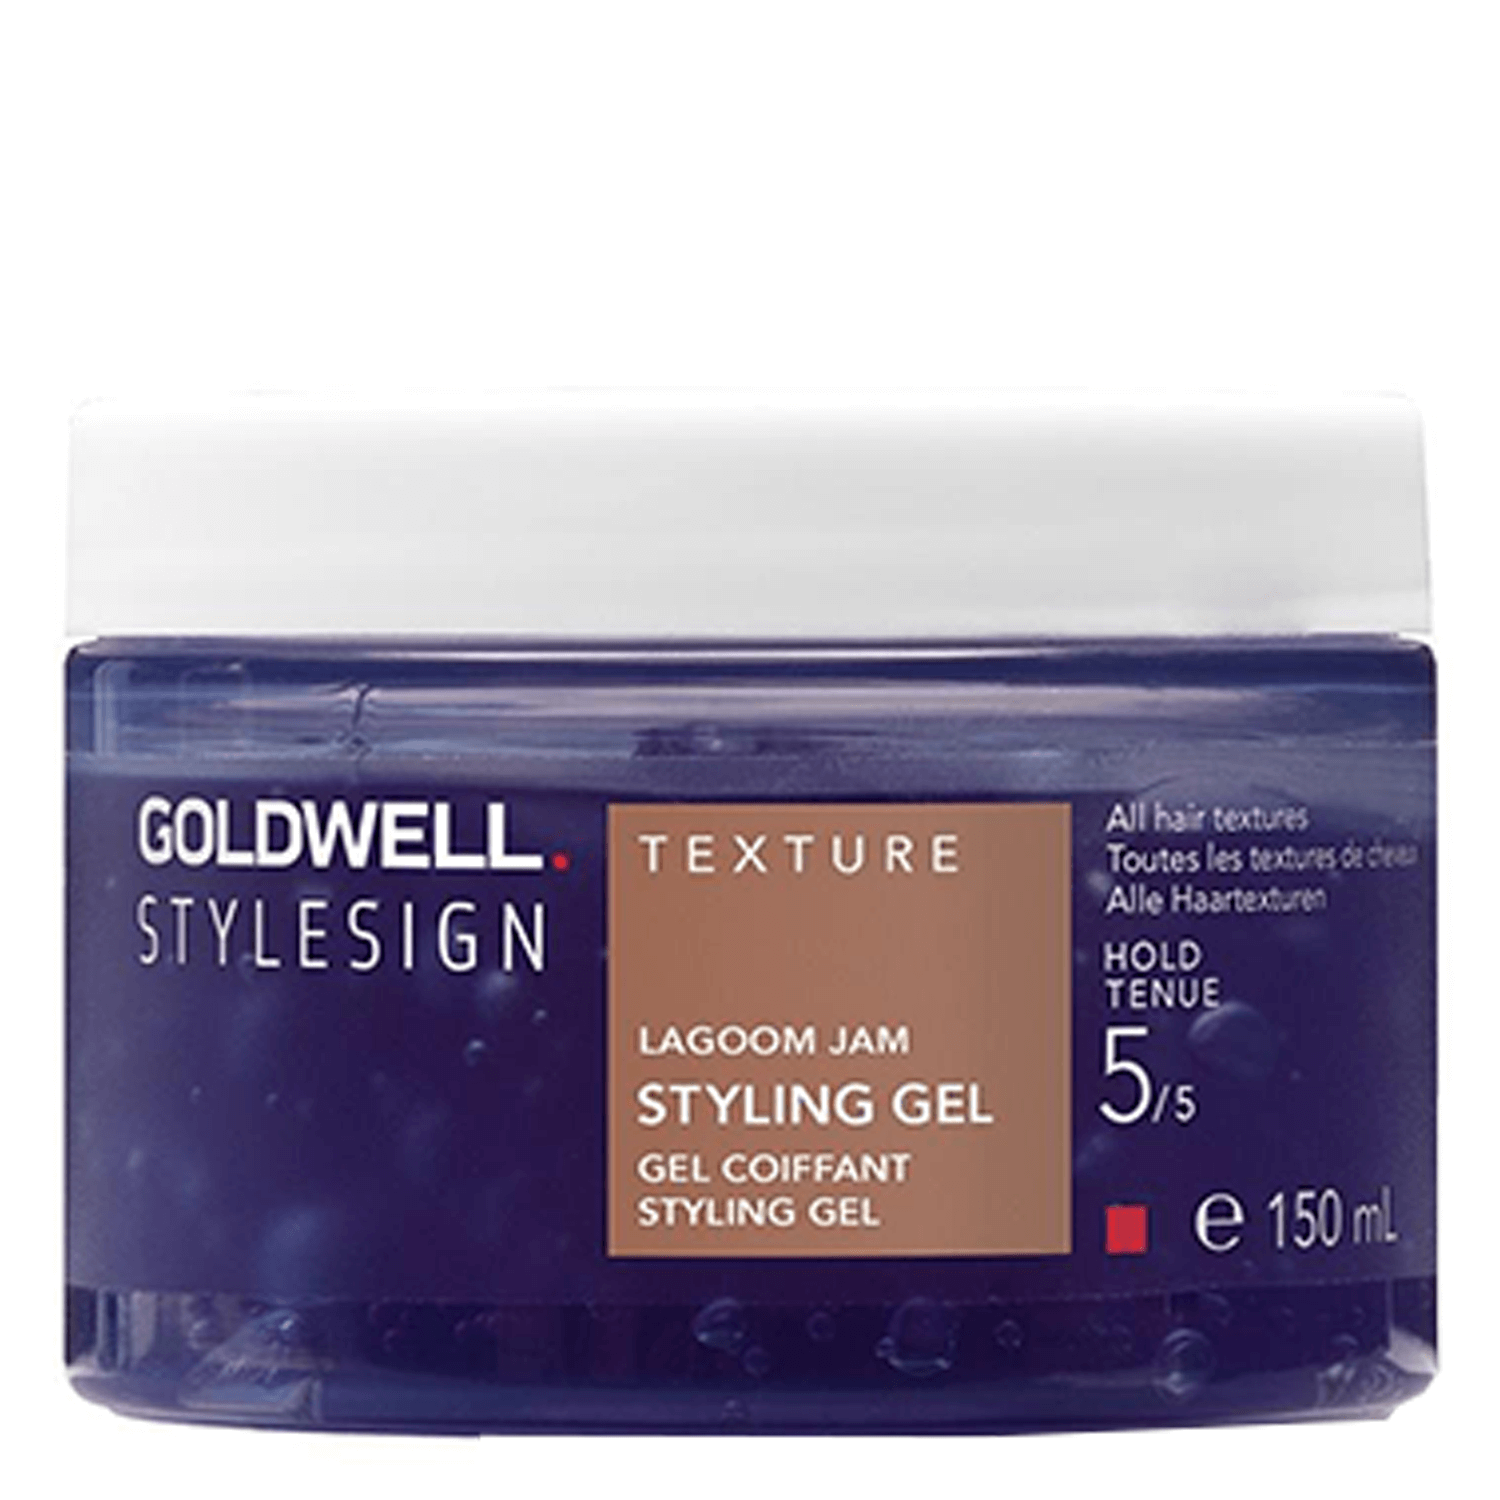 Product image from StyleSign - texture lagoom jam styling gel